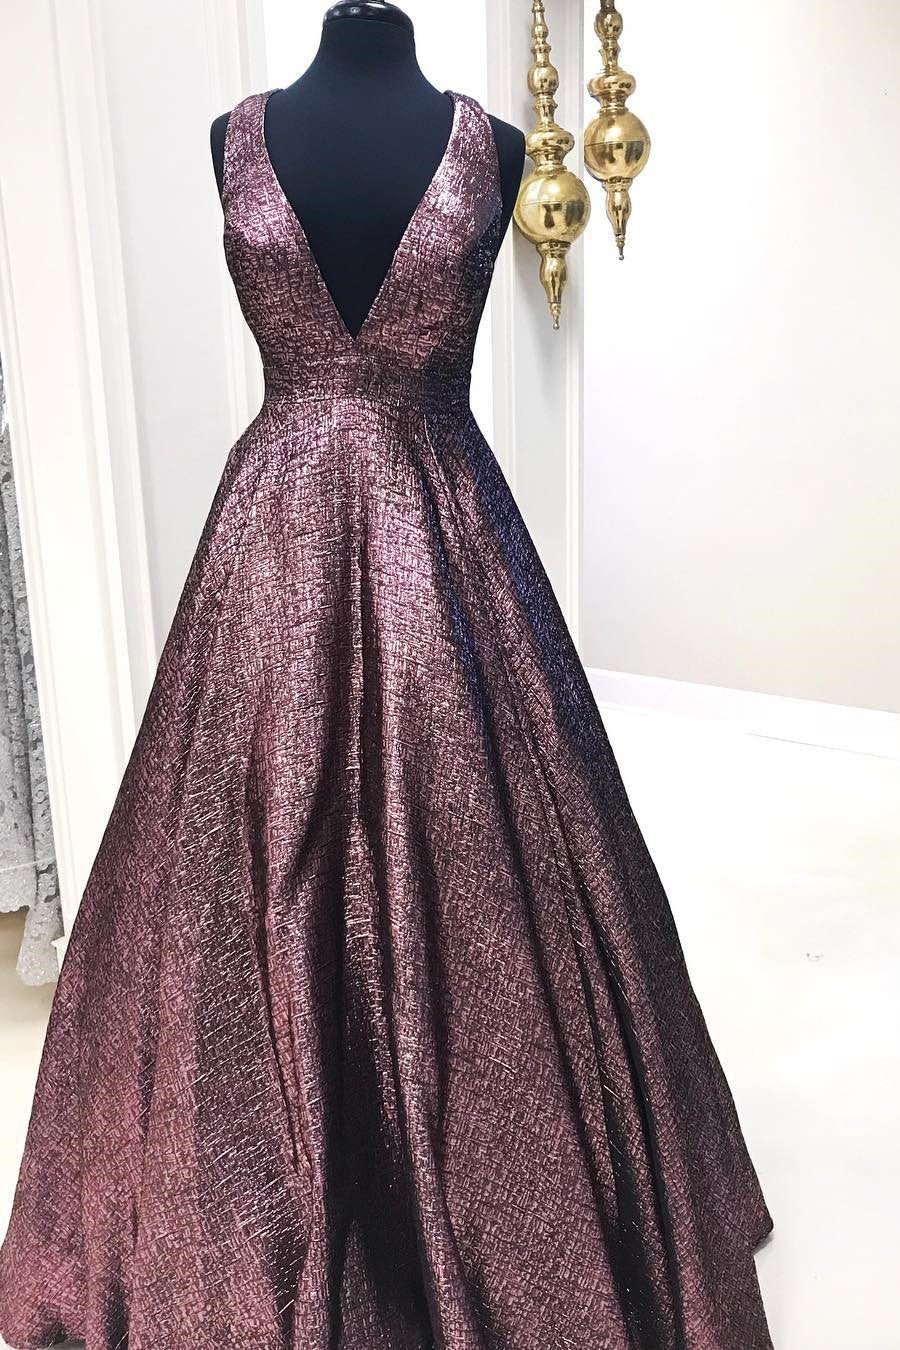 Elegant Deep V Neck Chocolate Brown Long Ball Gown Prom Dresses with Pockets